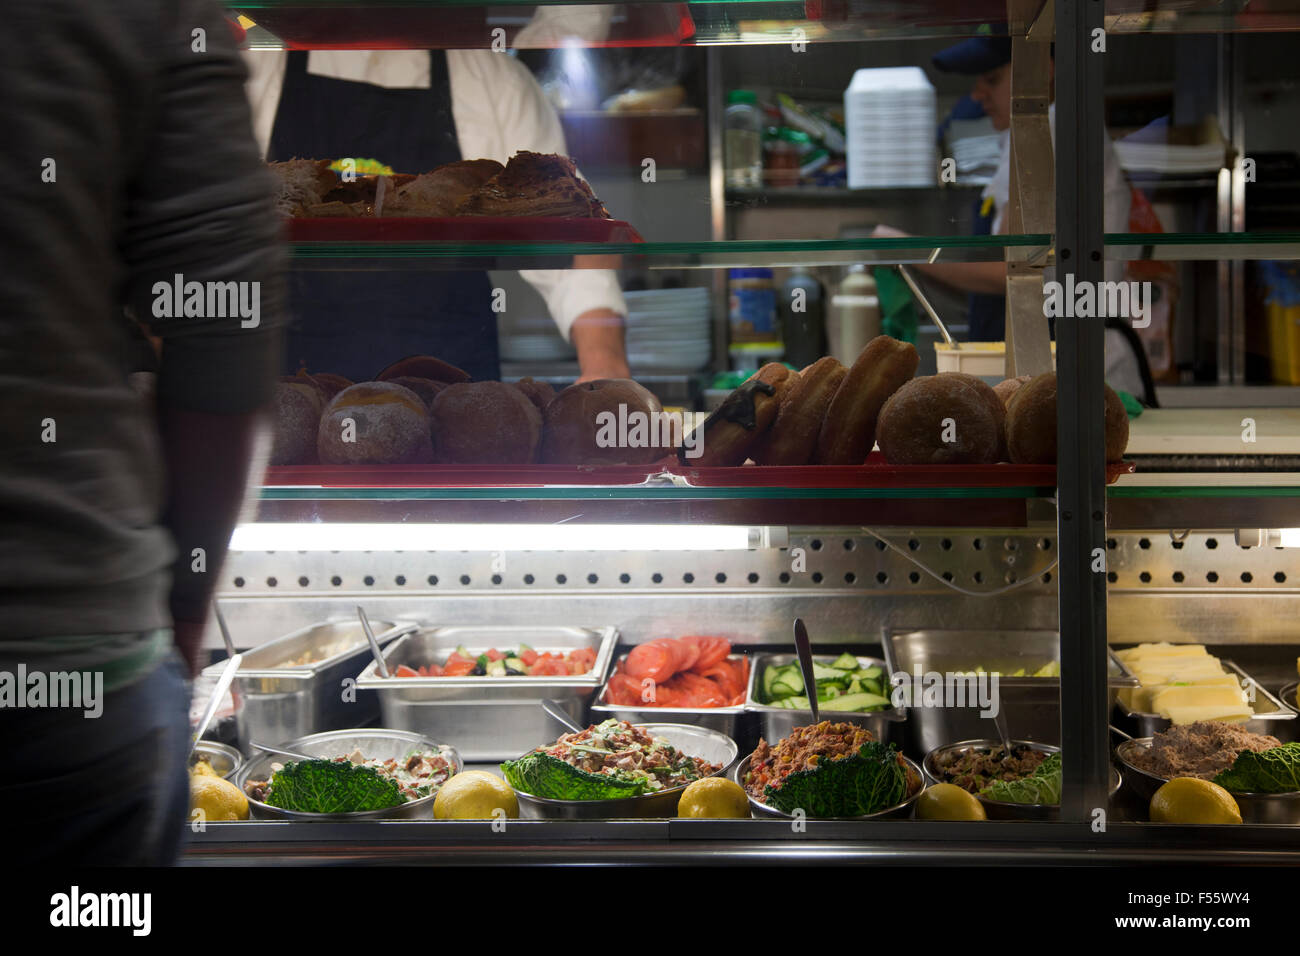 Sandwich Bar display of Food; salad, meats and fillings Stock Photo